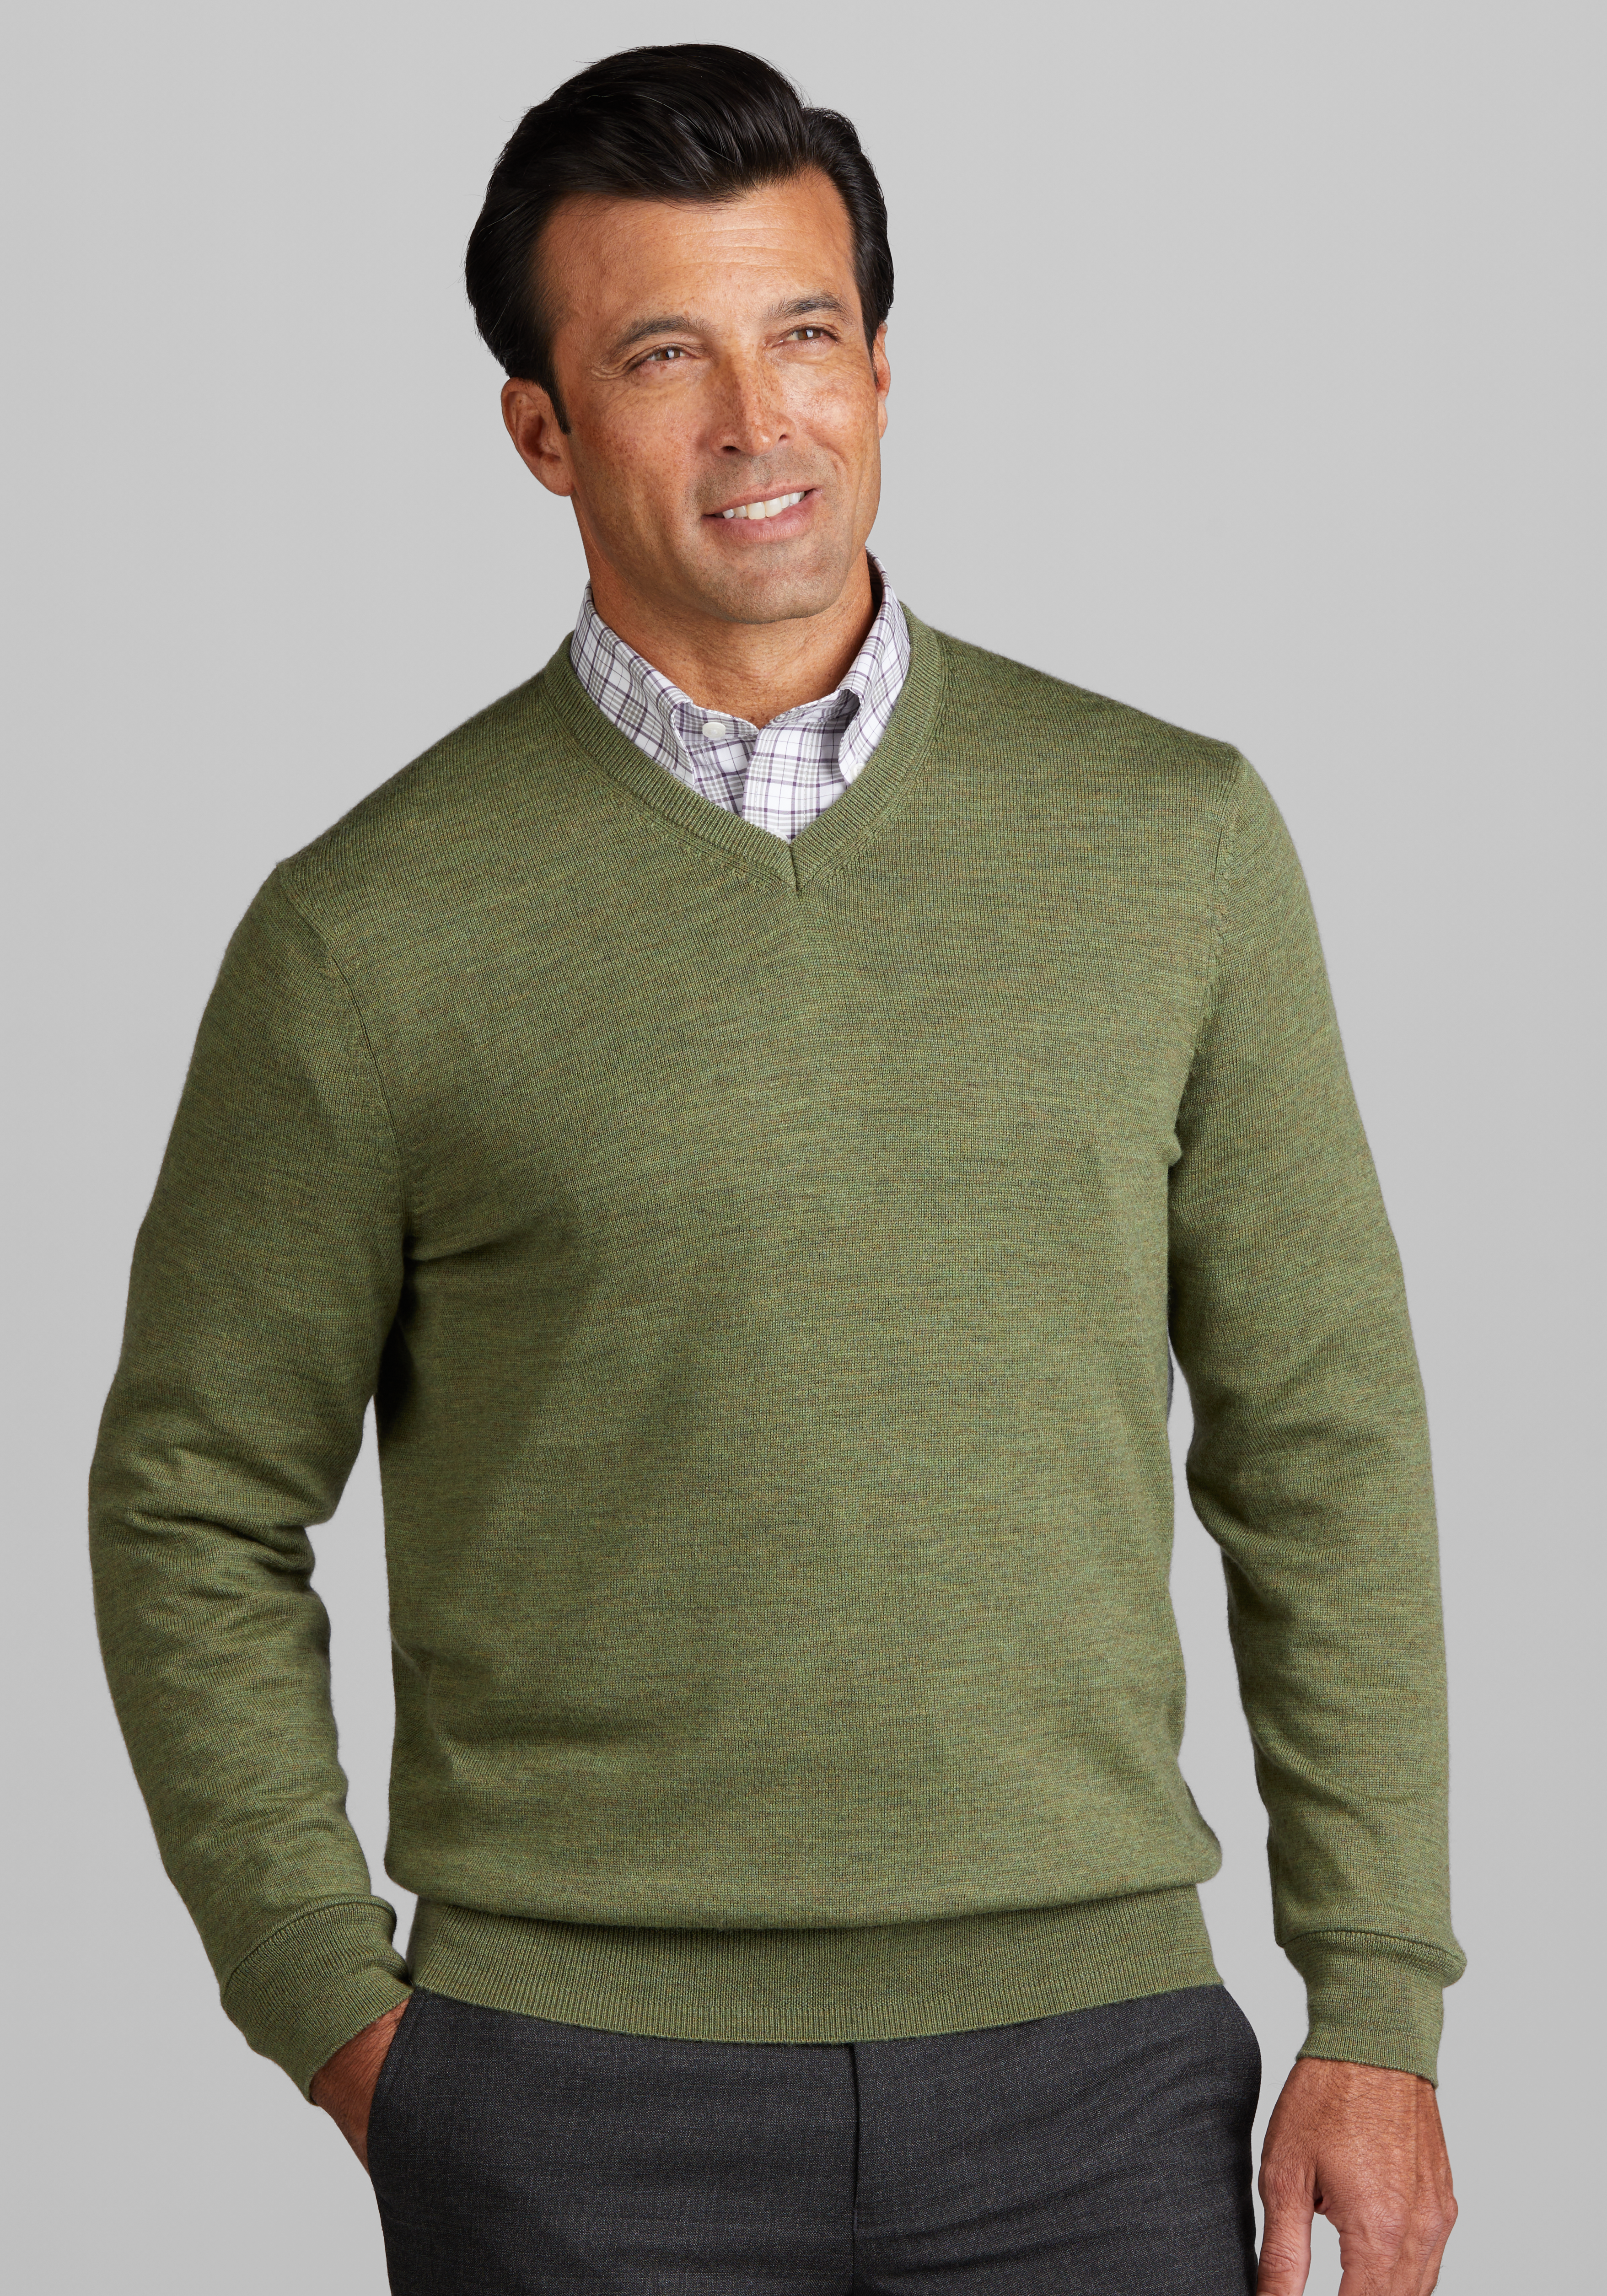 Men's V-Neck Sweaters, Big and Tall